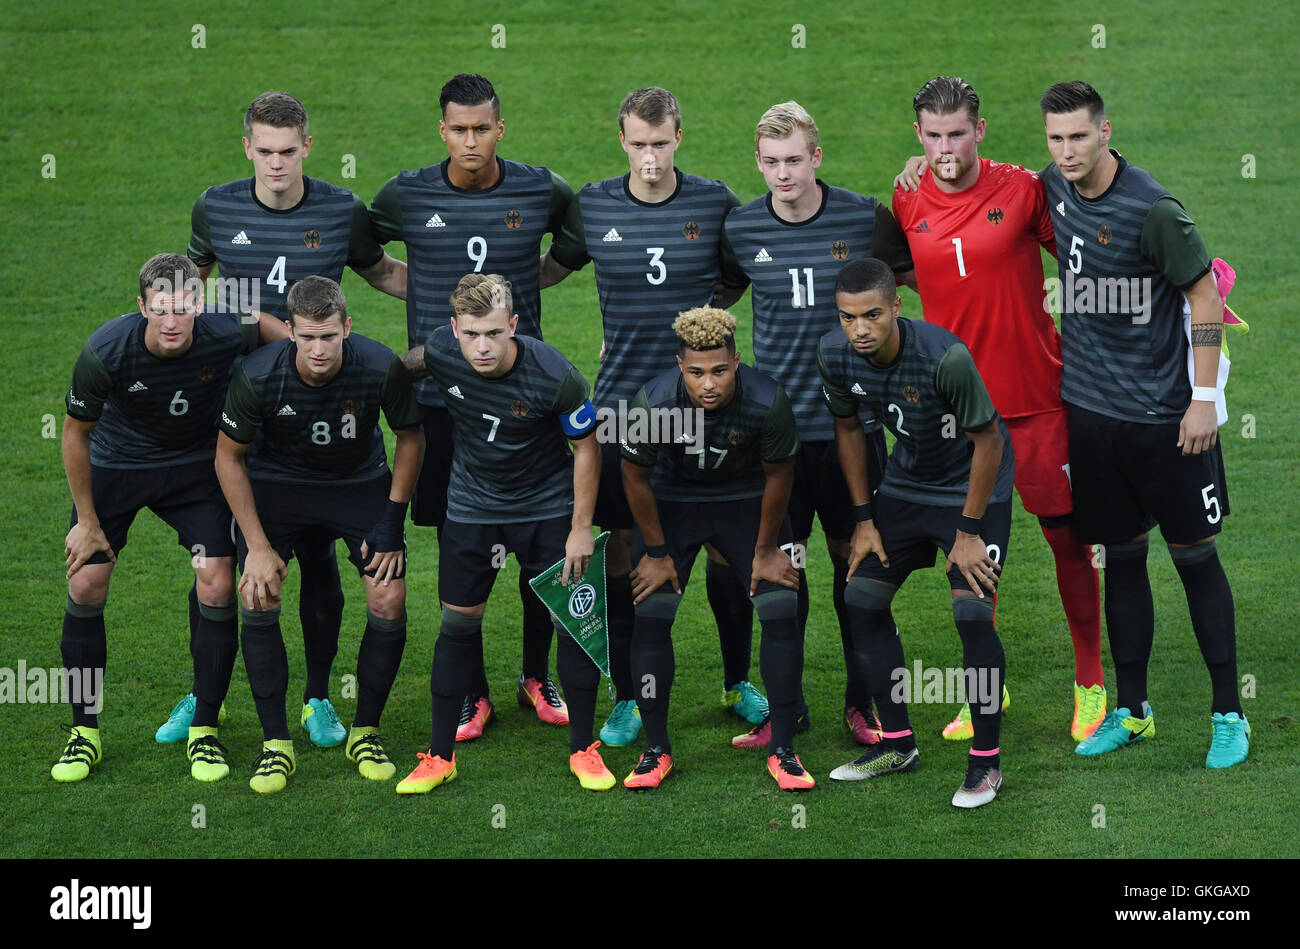 Rio de Janeiro, Brazil. 20th Aug, 2016. Germany's Olympic Soccer team lines-up prior to the Men's soccer Gold Medal Match between Brazil and Germany during the Rio 2016 Olympic Games at the Maracana in Rio de Janeiro, Brazil, 20 August 2016. Front line L-R: Sven Bender, Lars Bender, Maximilian Meyer, Serge Gnarby, Jeremy Toljan. 2nd row L-R: Matthias Ginter, Davie Selke, Lukas Klostermann, Julian Brandt, goalkeeper Timo Horn, Niklas Suele. Photo: Sebastian Kahnert/dpa/Alamy Live News Stock Photo